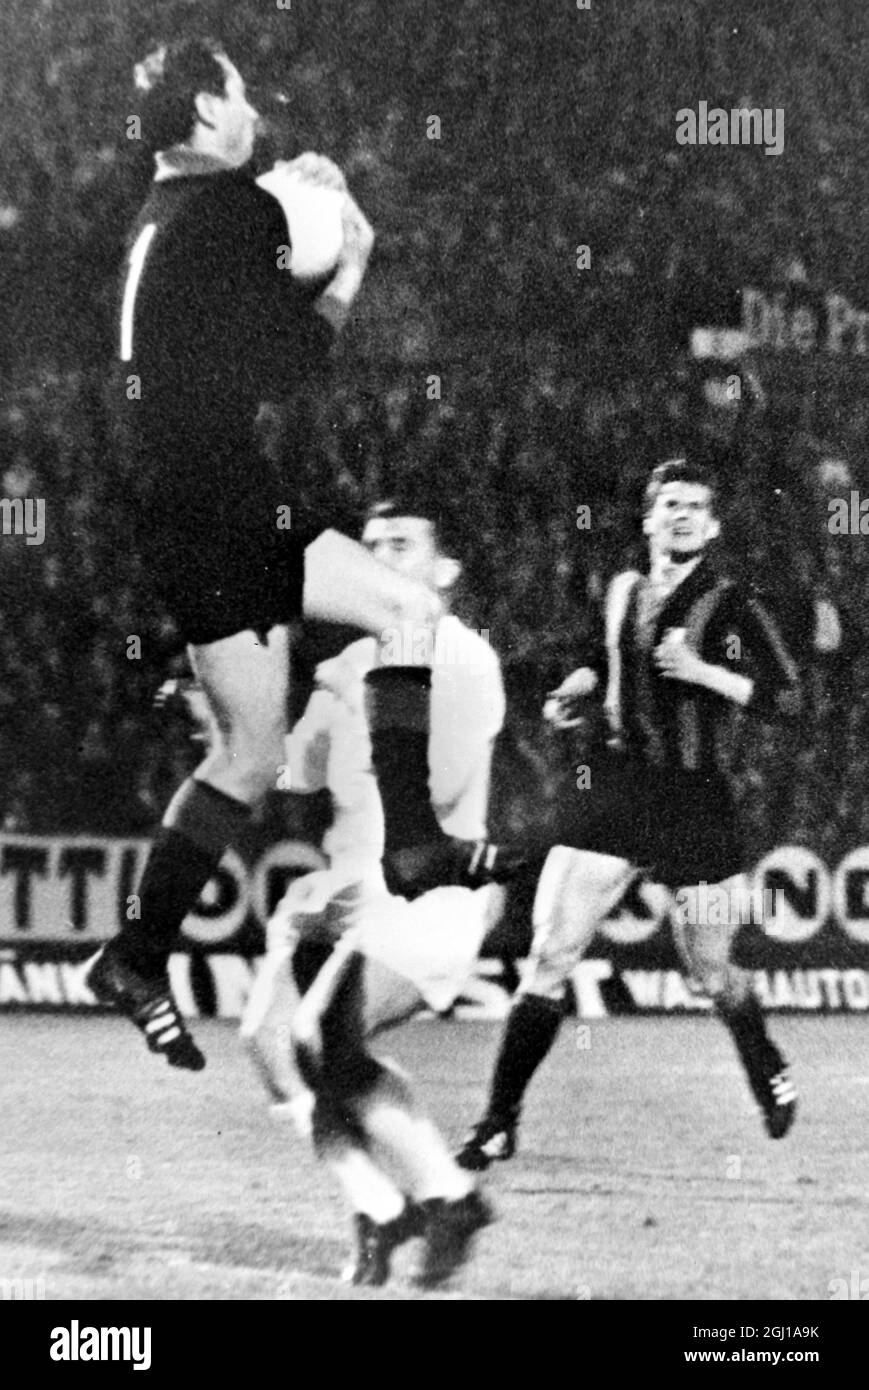 INTER MAILAND V REAL MADRID - EUROPEAN CUP OF LEAGUE CHAMPIONS FINAL, FUSSBALL IN AKTION IN WIEN, ÖSTERREICH ; 29. MAI 1964 Stockfoto